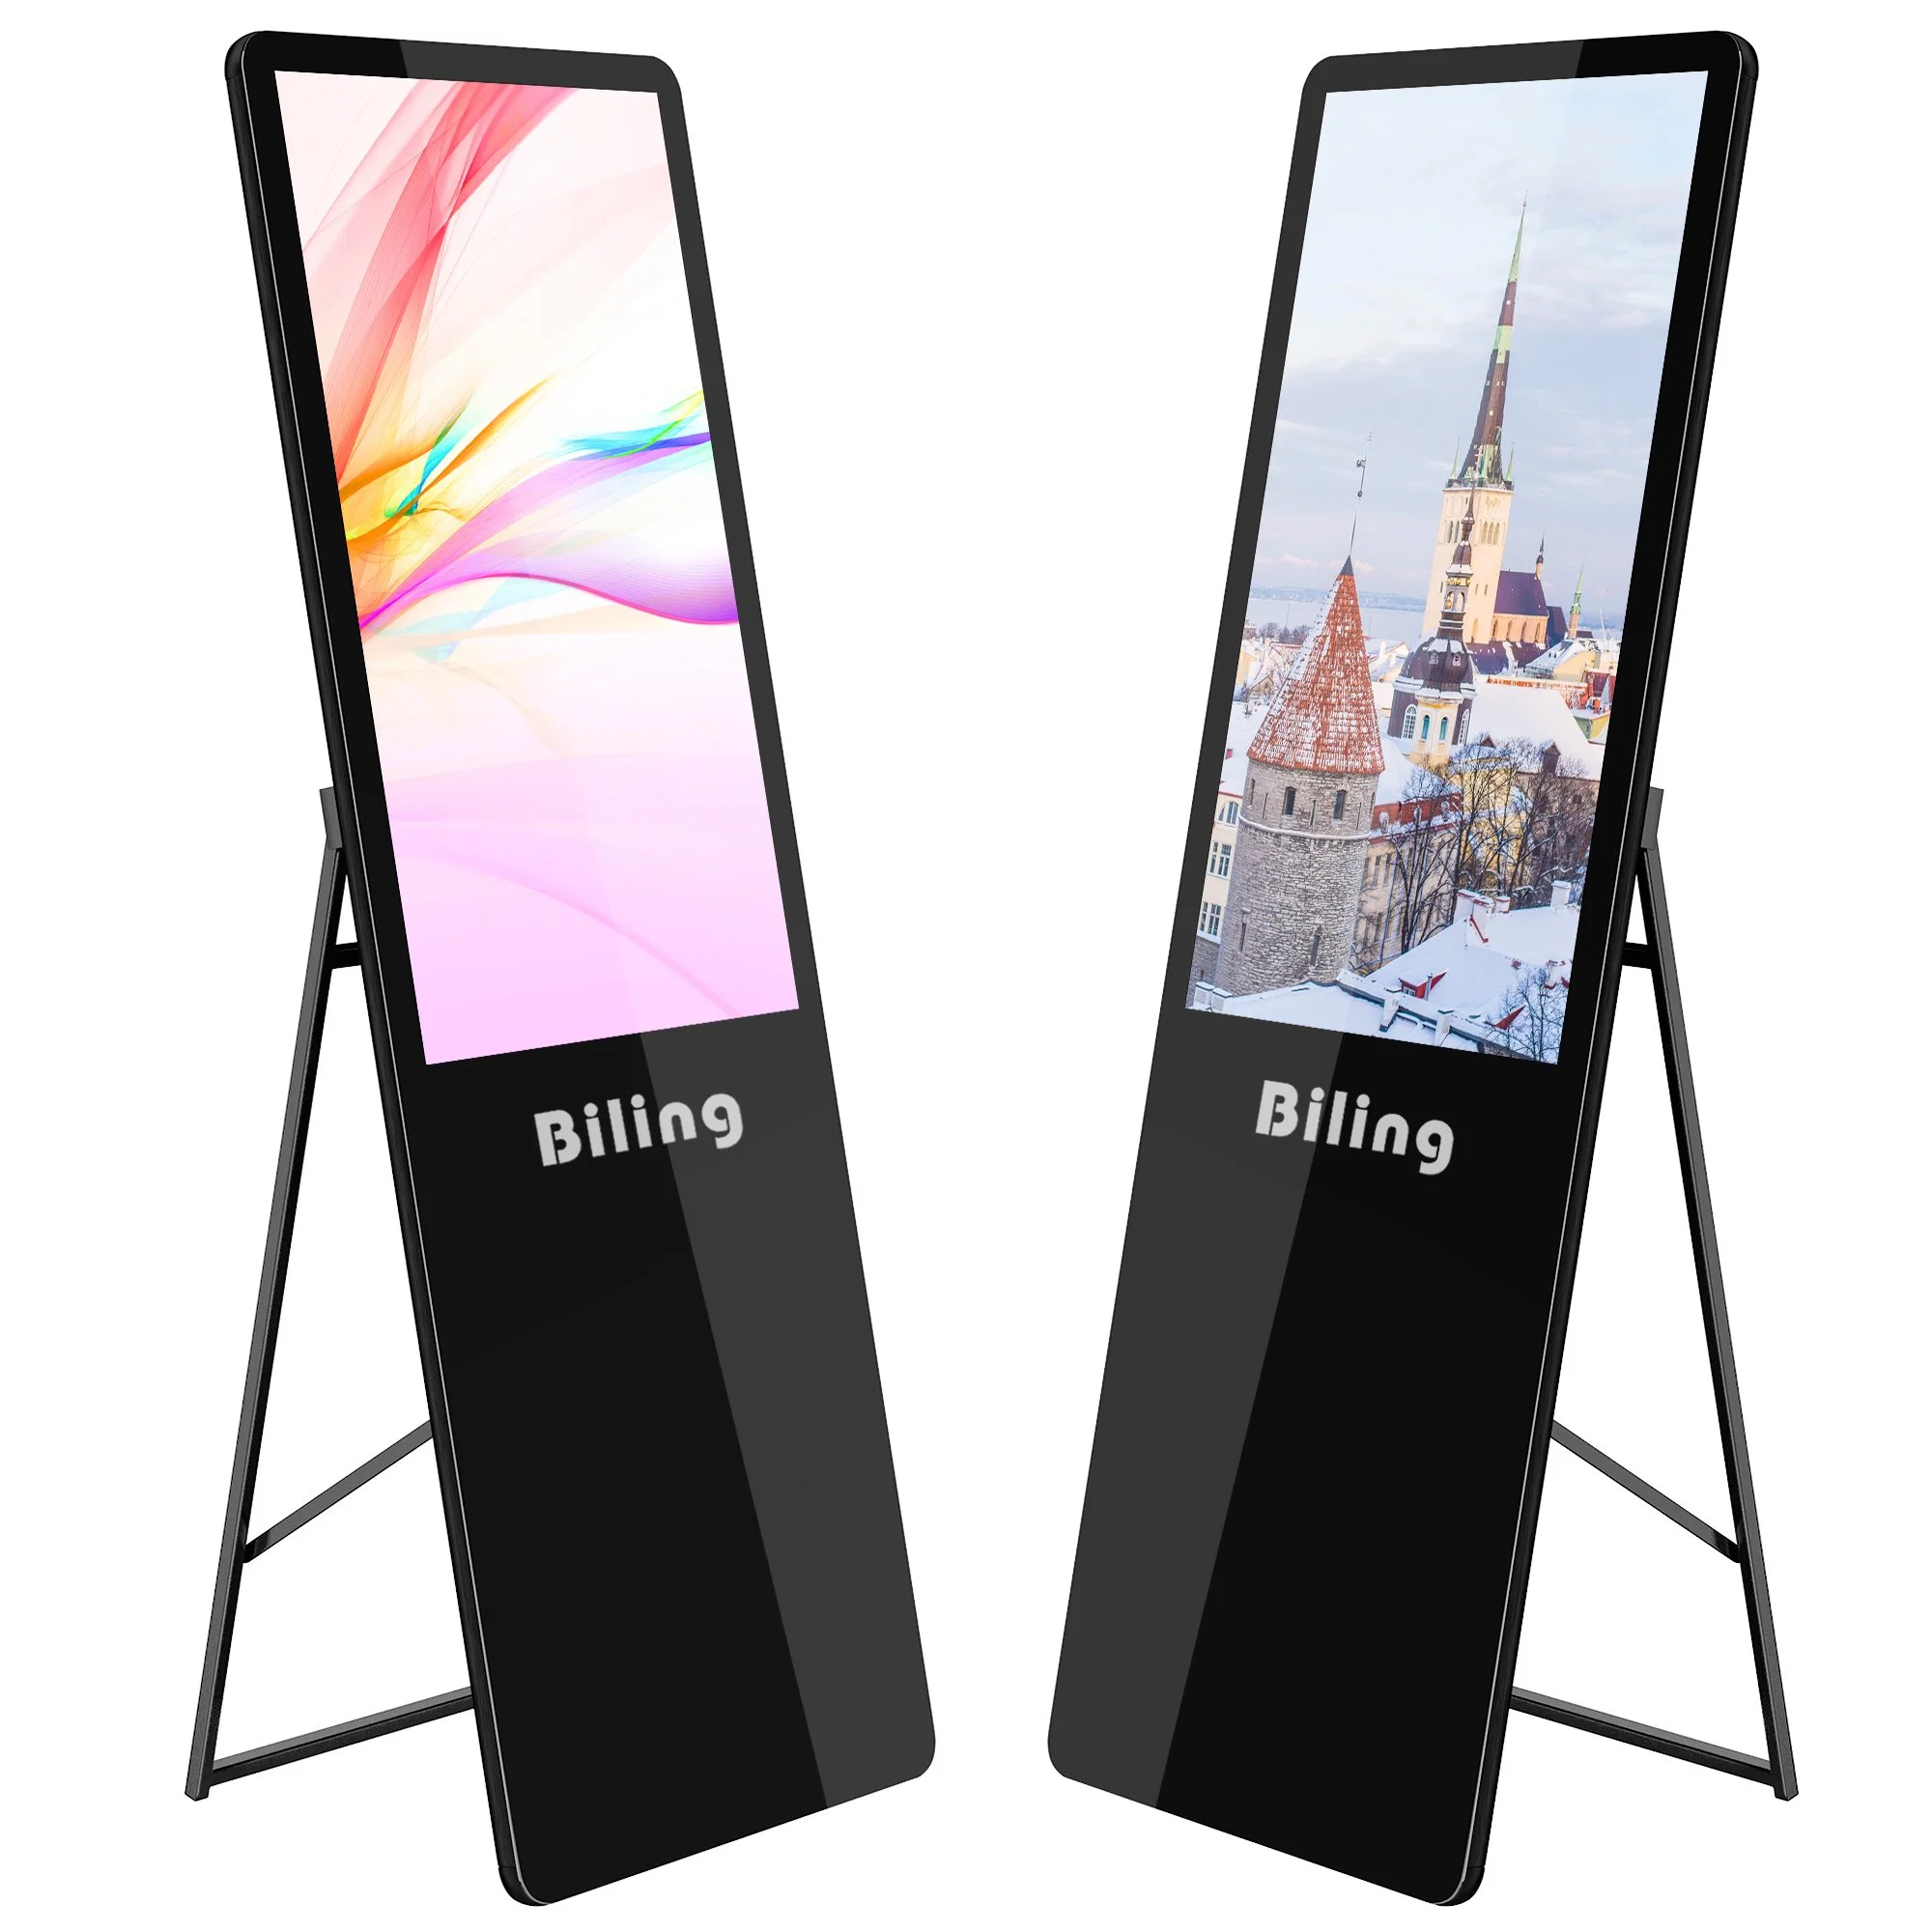 Portable Movable Digital Signage Network E-Poster LCD Advertising Display Screen Store Show Window Display Kiosk Shopping Mall Totem LCD Display